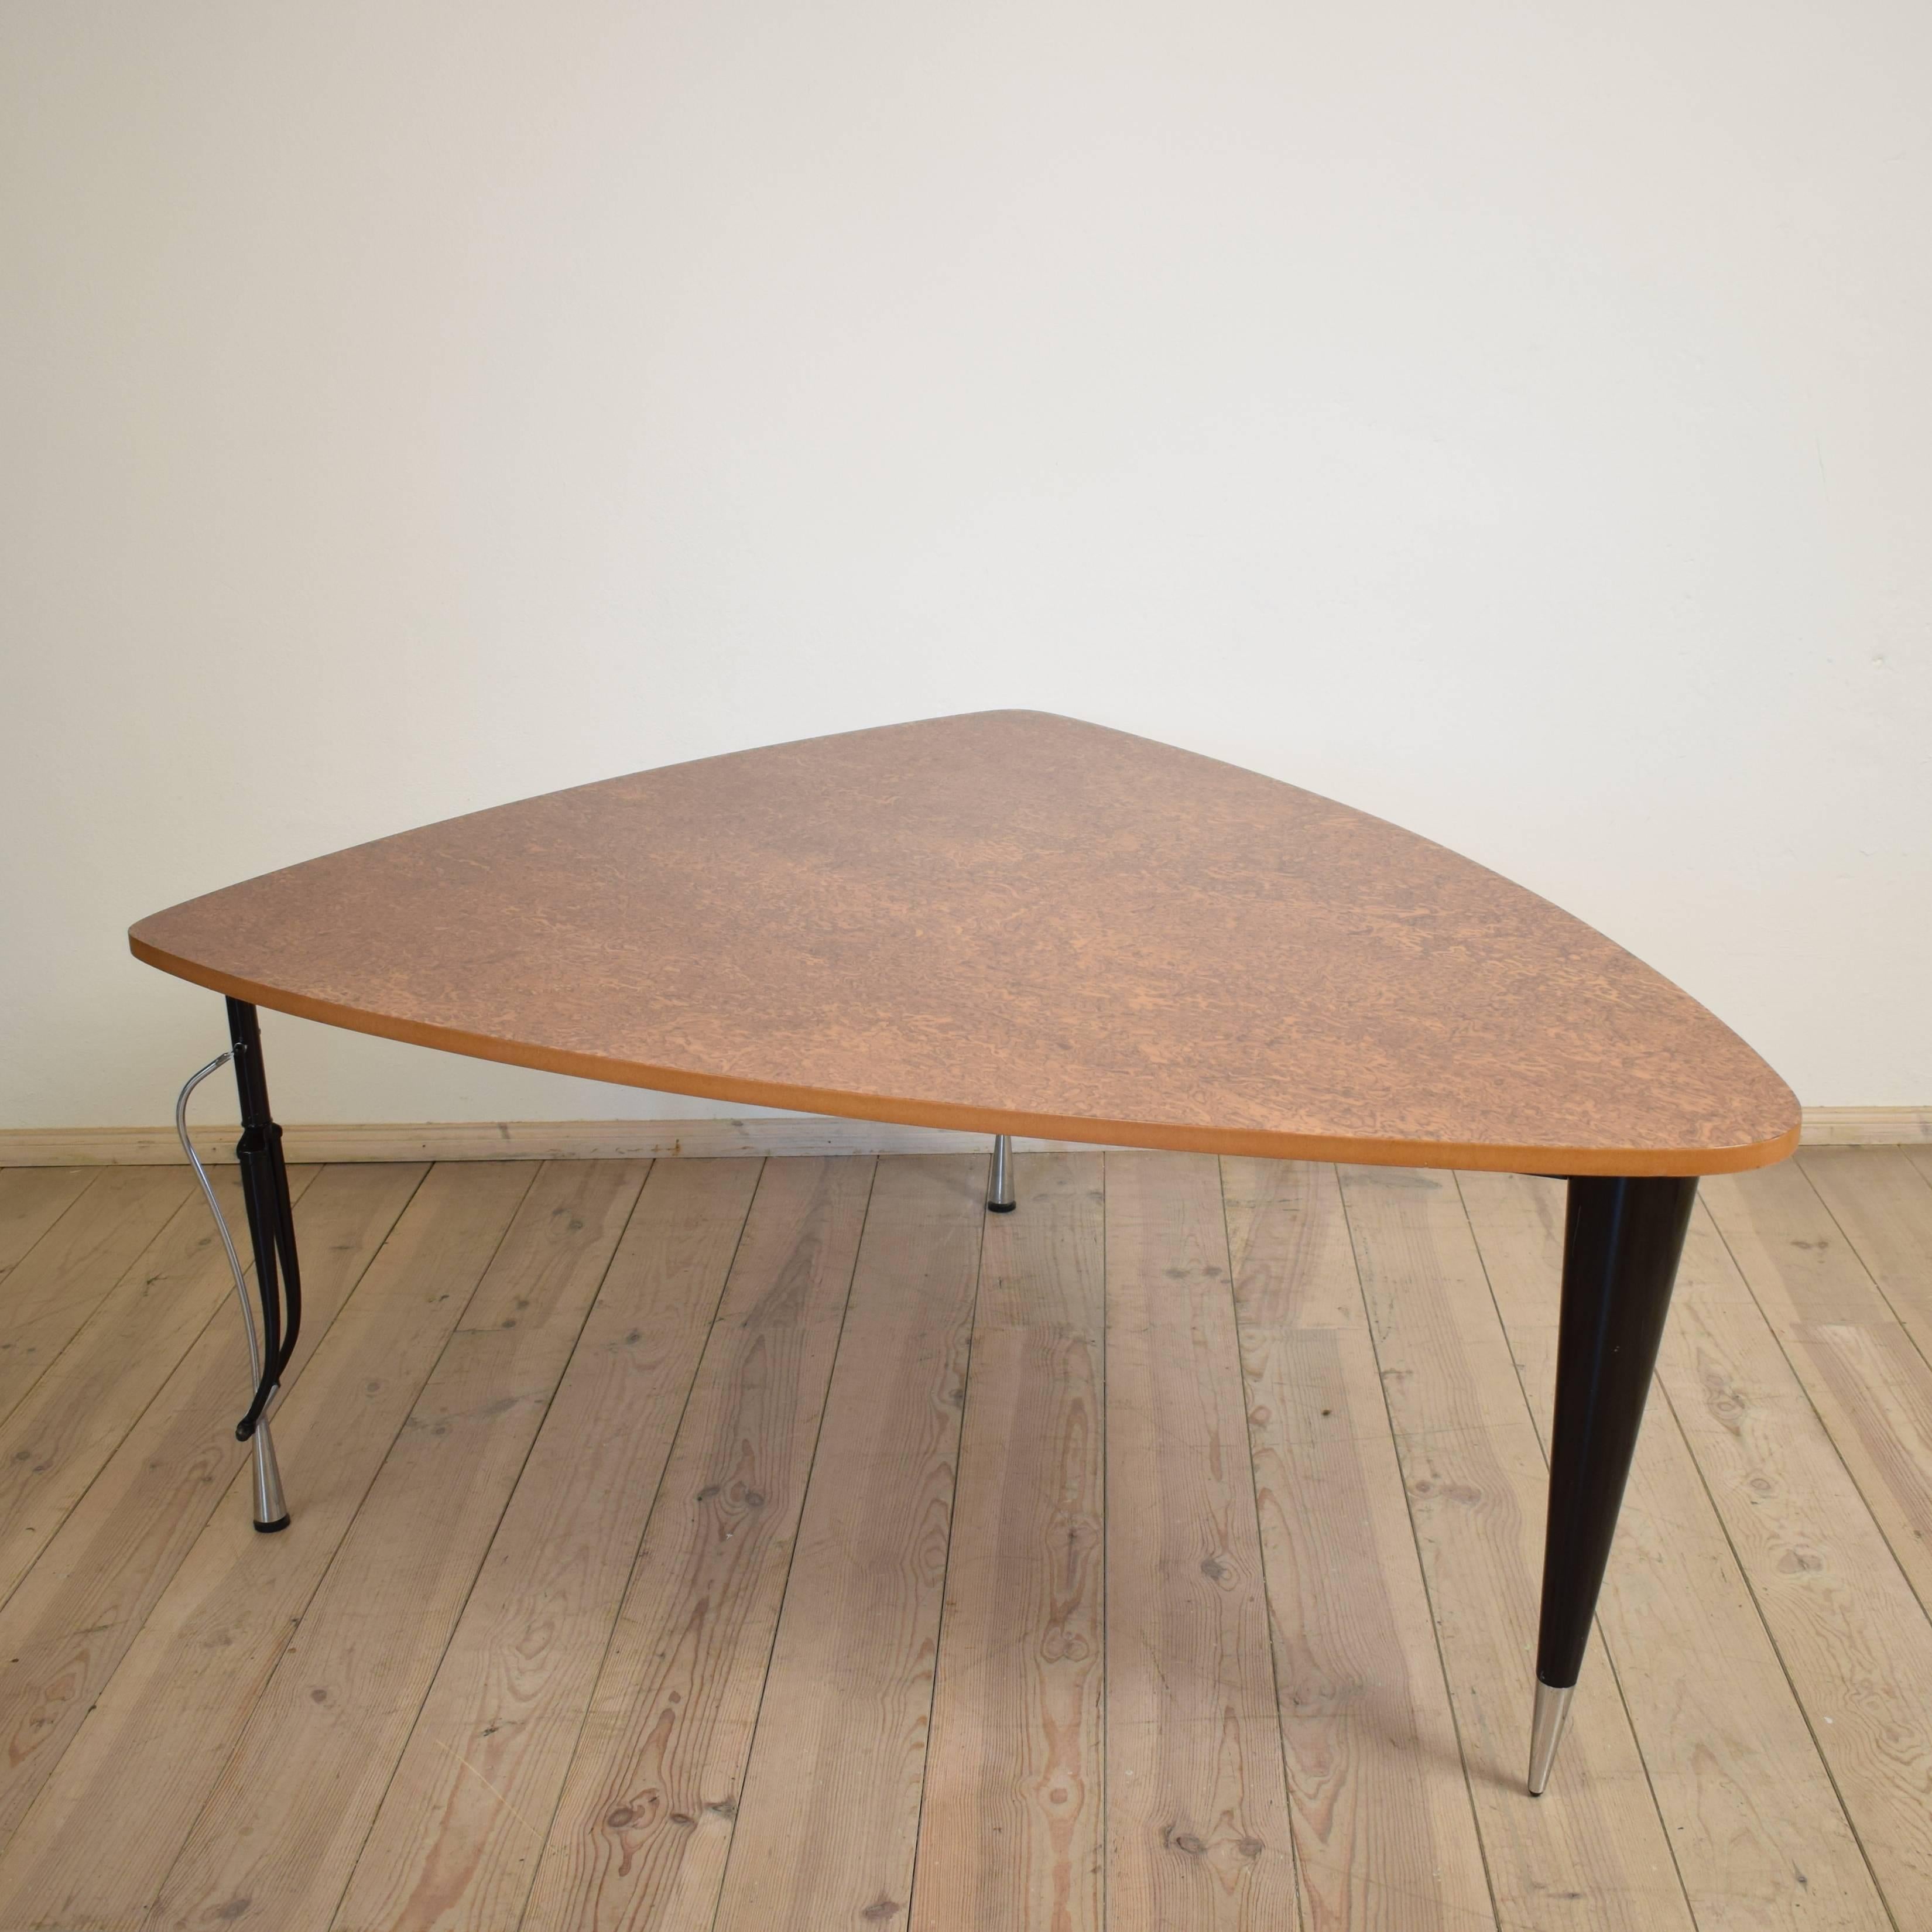 This Memphis dining table by Perry King and Santiago Miranda was designed and built 1986.
This Model is called 